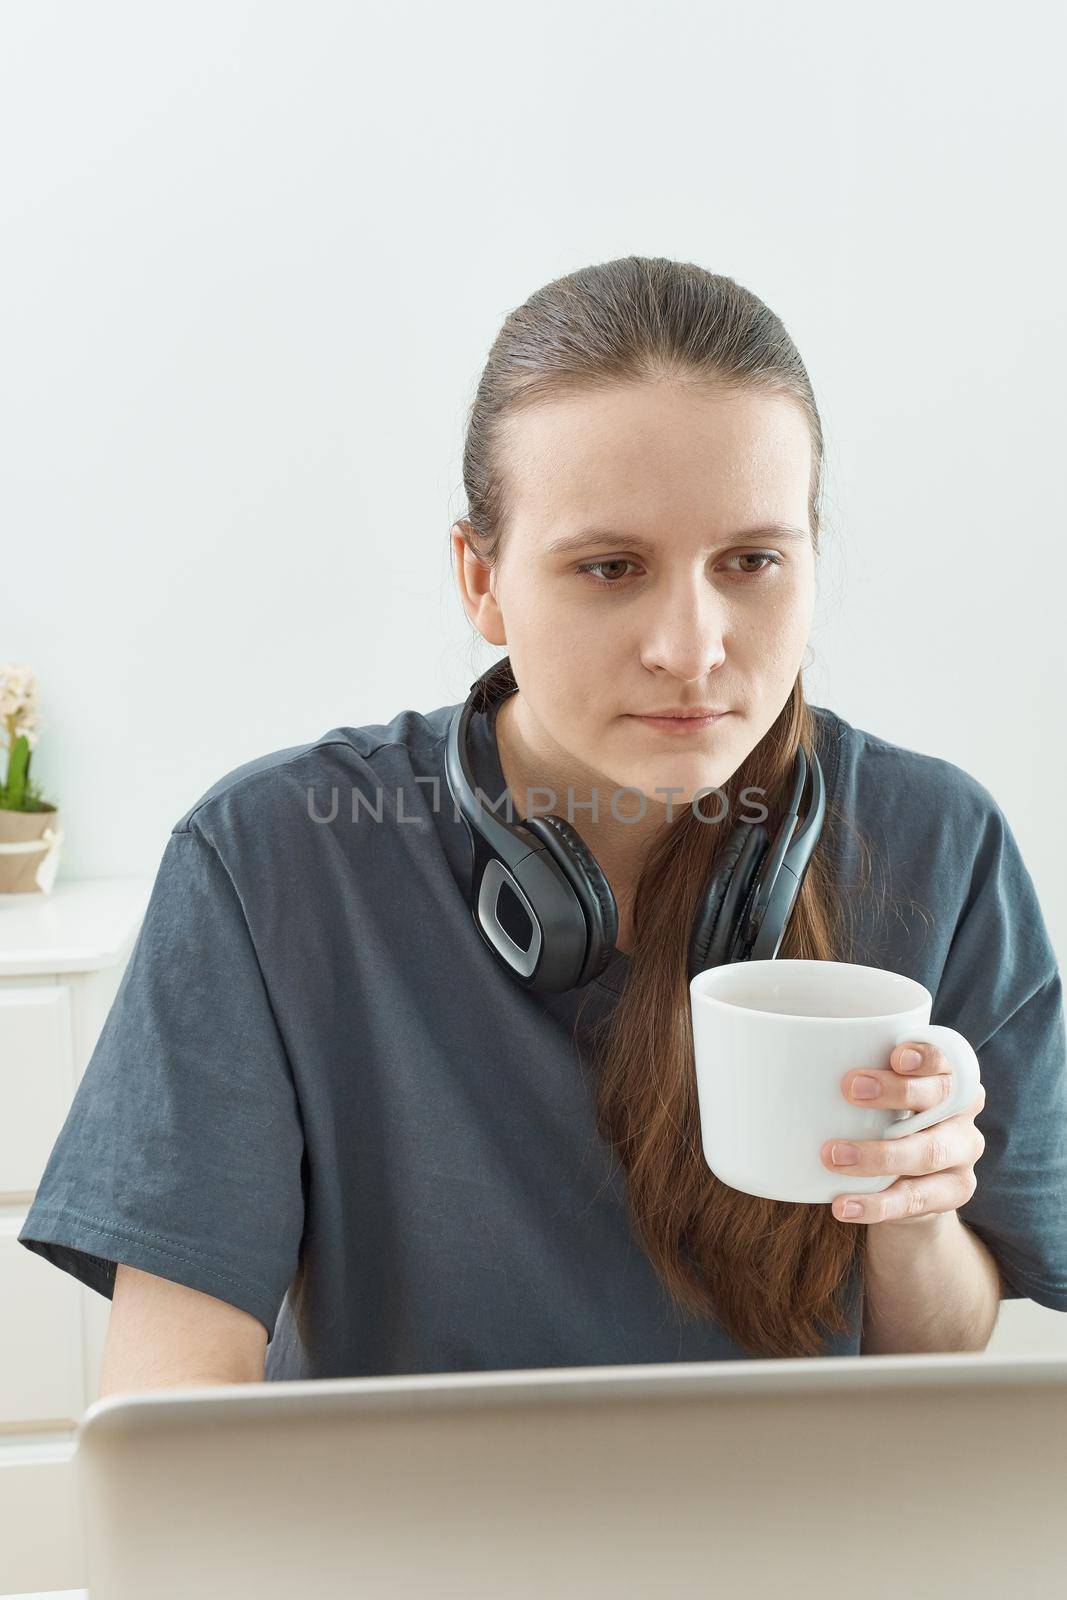 Girl with headphones playing tired of playing games on computer on computer, woman has taken a break and is drinking tea. Quarantine, self-isolation, sociophobia.